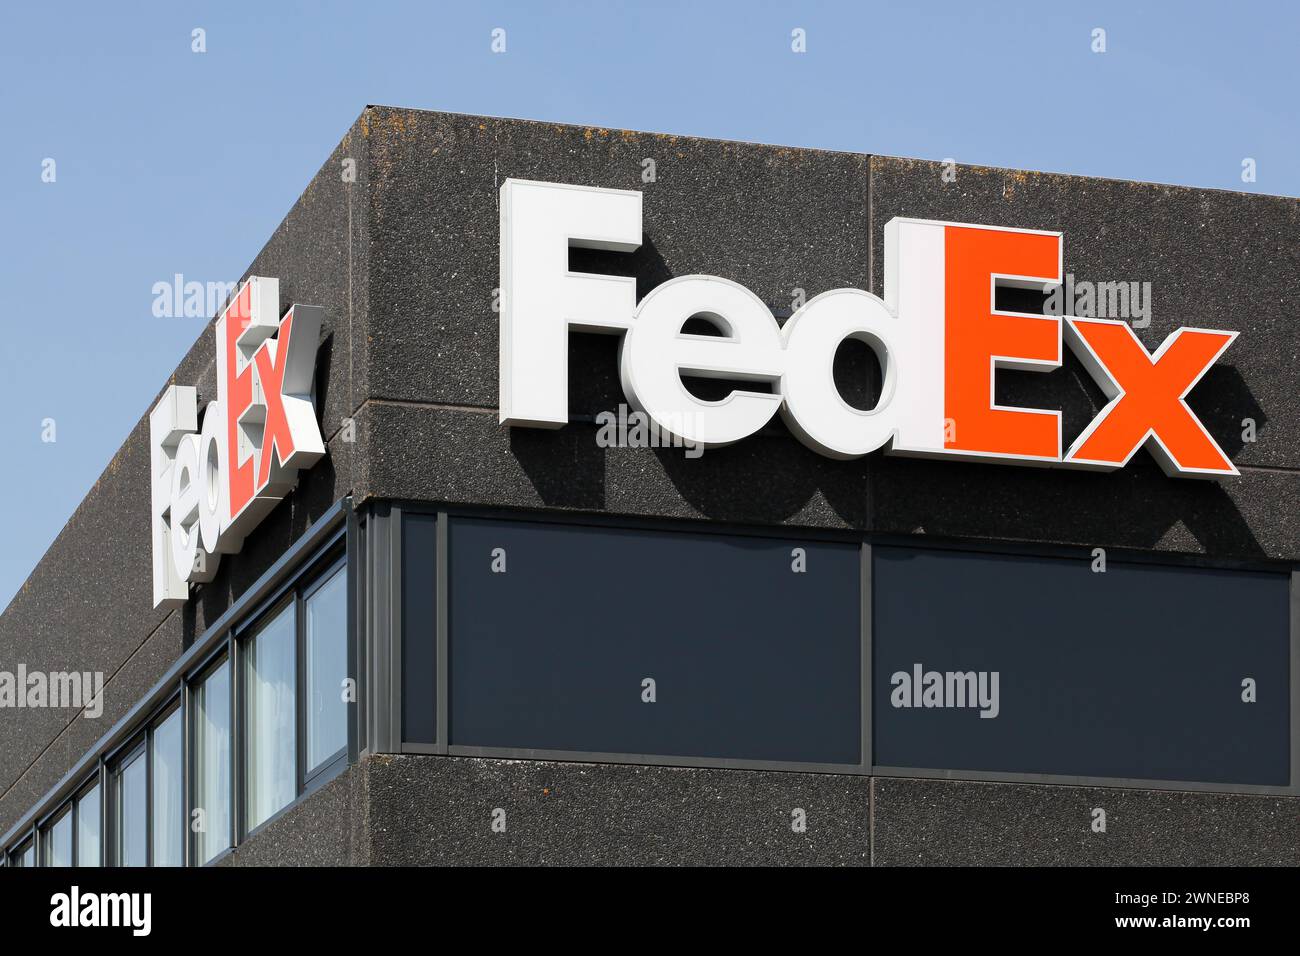 Kolding, Denmark - August 16, 2020: FedEx sign on a building. FedEx Corporation is an American global courier delivery services company Stock Photo